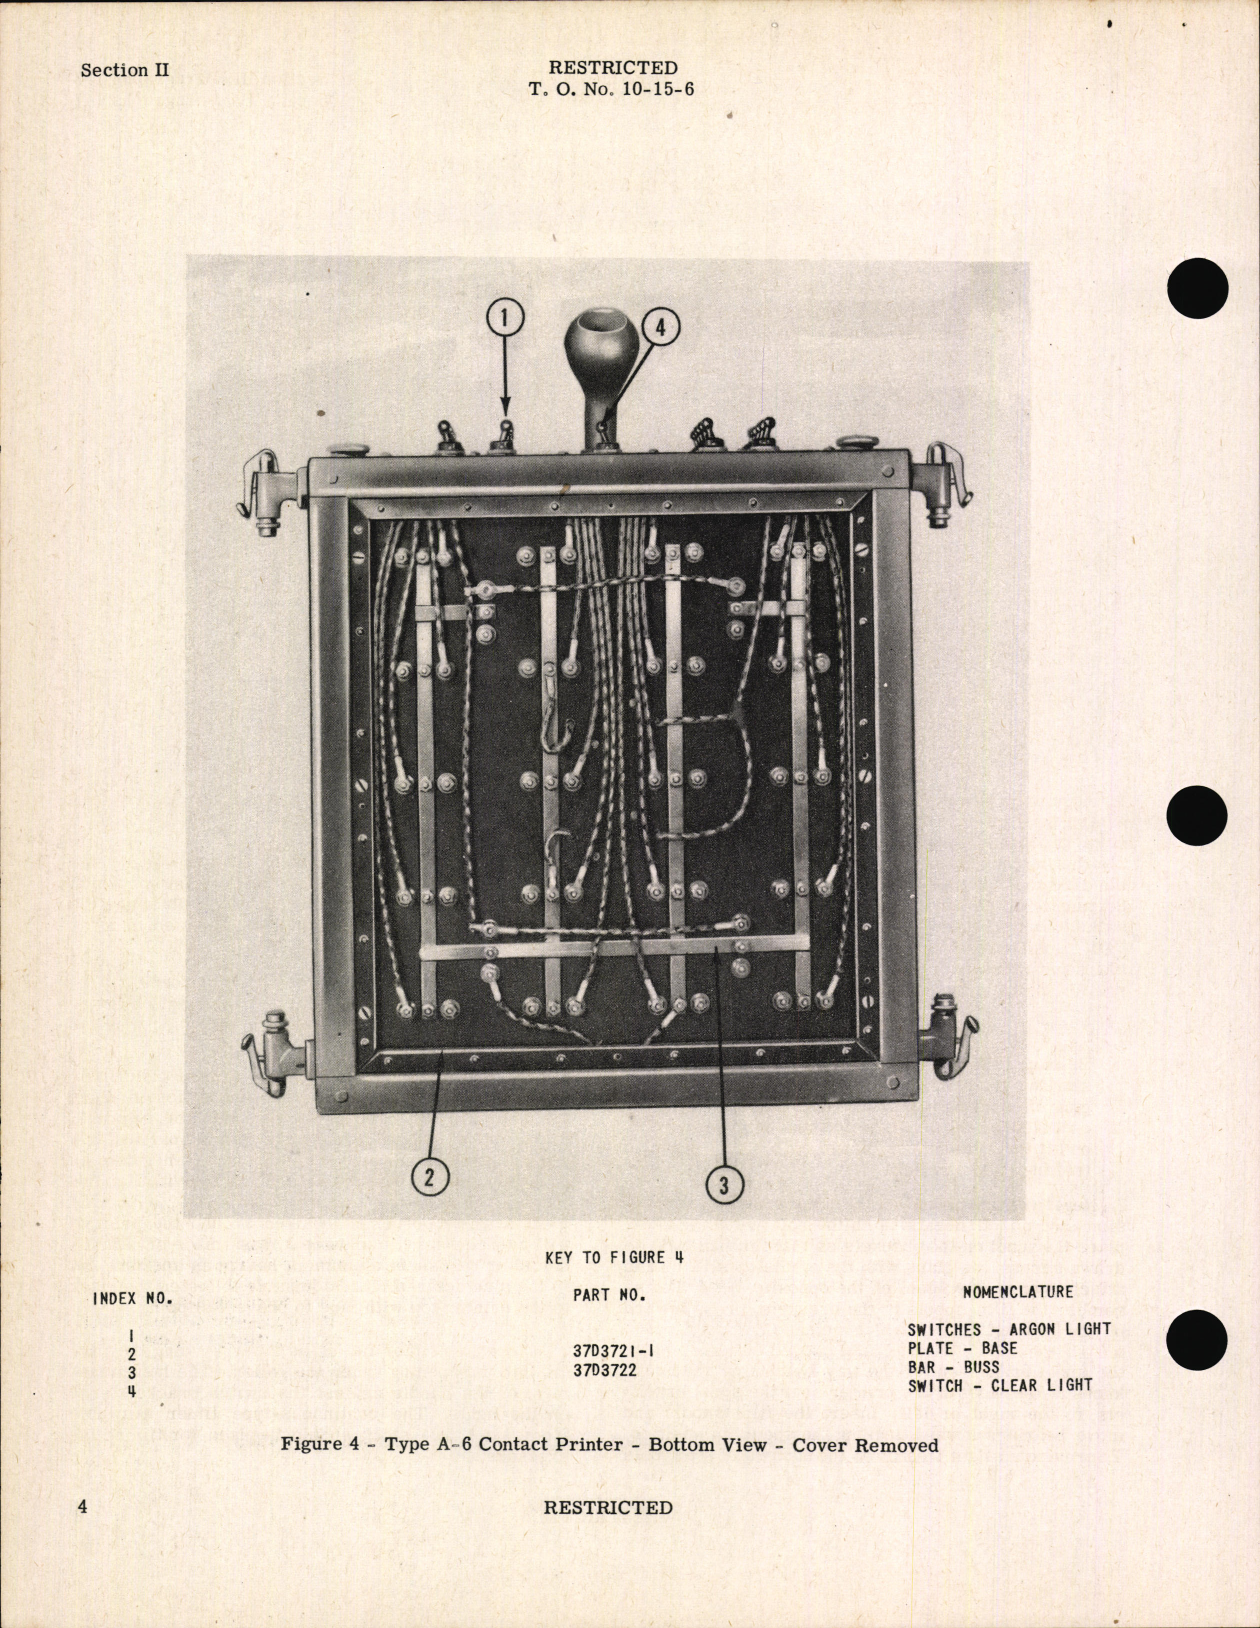 Sample page 8 from AirCorps Library document: Handbook of Instructions with Parts Catalog for Type A-6 Contact Printer For Type A Portable Laboratories